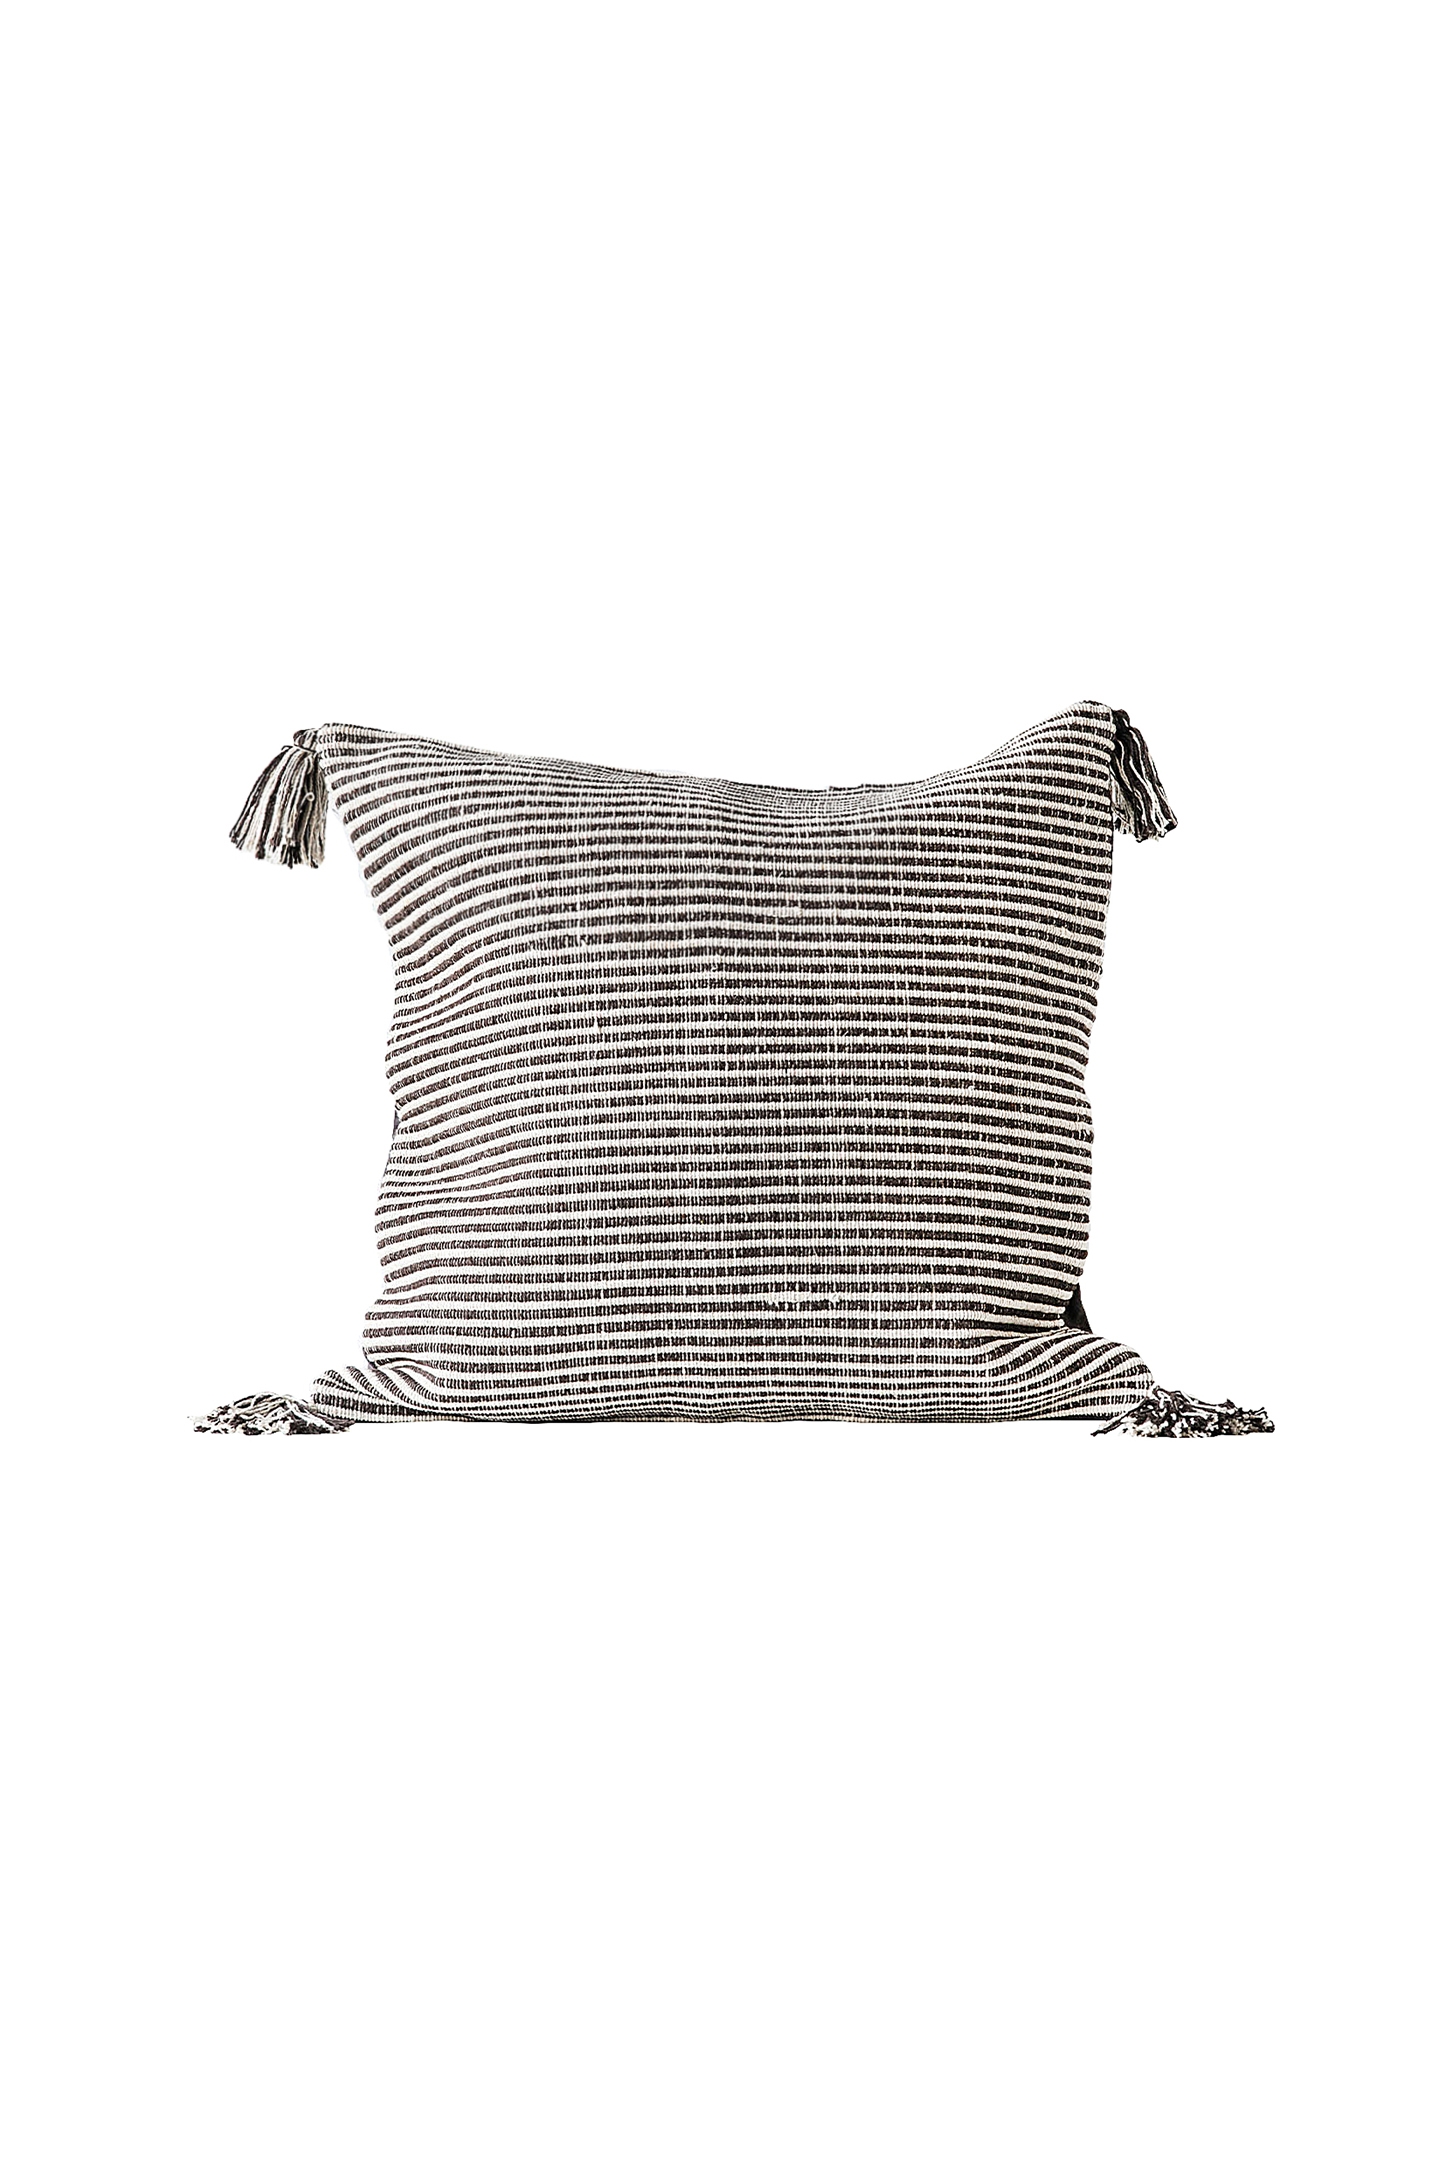 Stafford Striped Pillows, Neutrals, 24" x 24", Set of 2 - Image 3